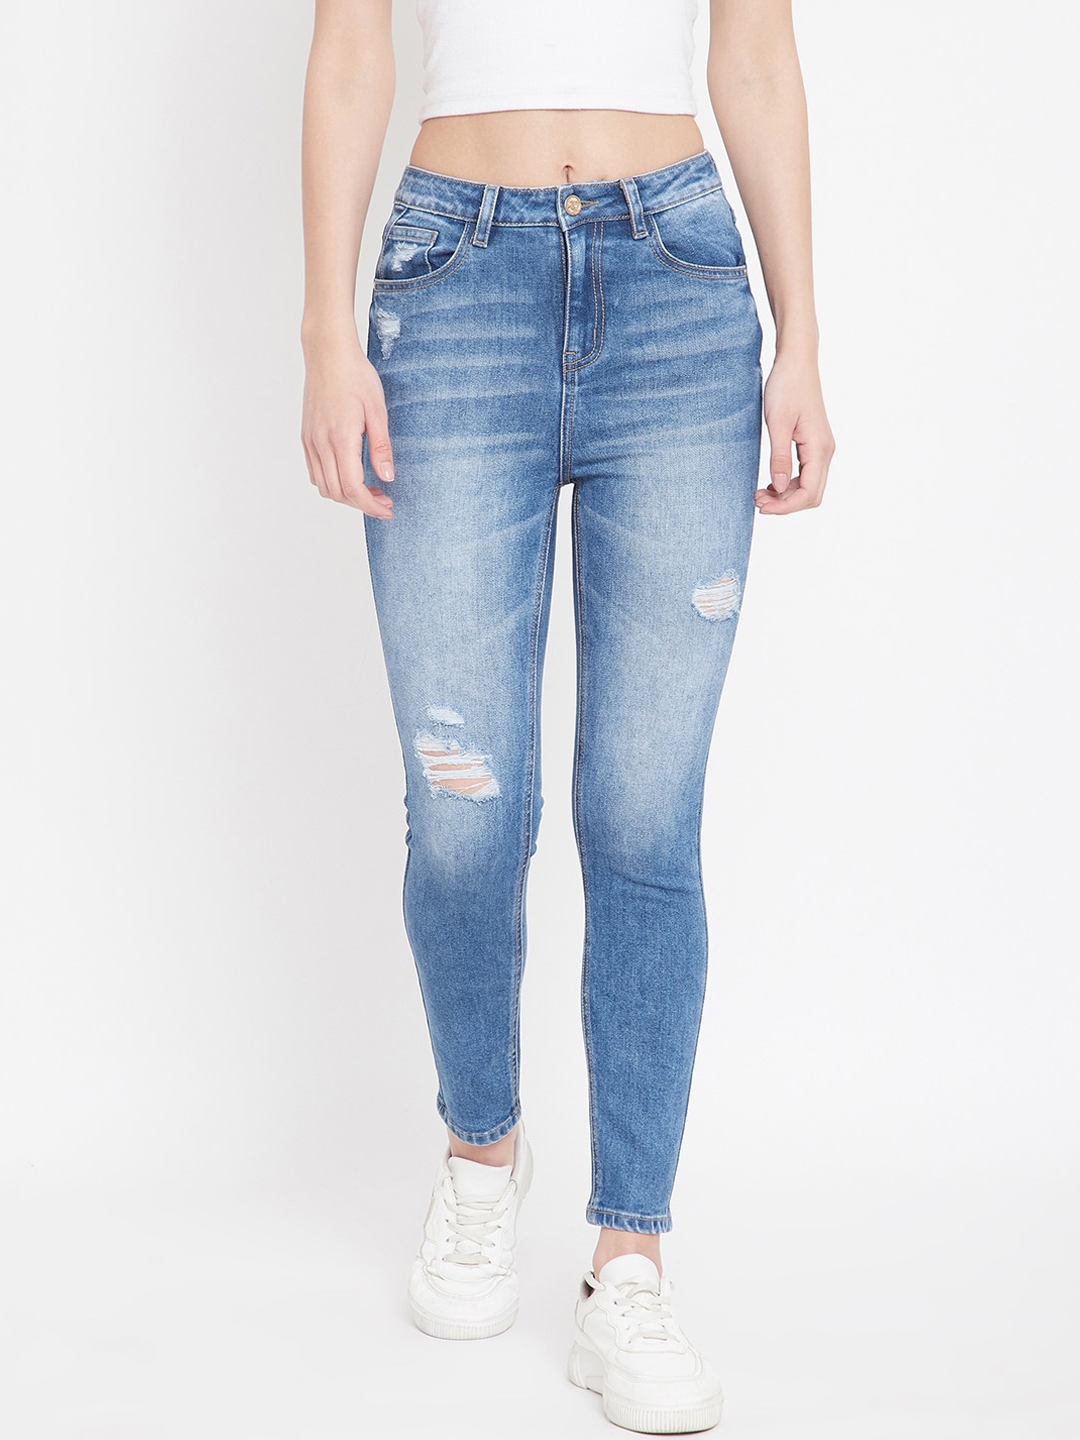 Buy Madame Women Blue Skinny Fit Mildly Distressed Heavy Fade Jeans - Jeans for Women 16533062 